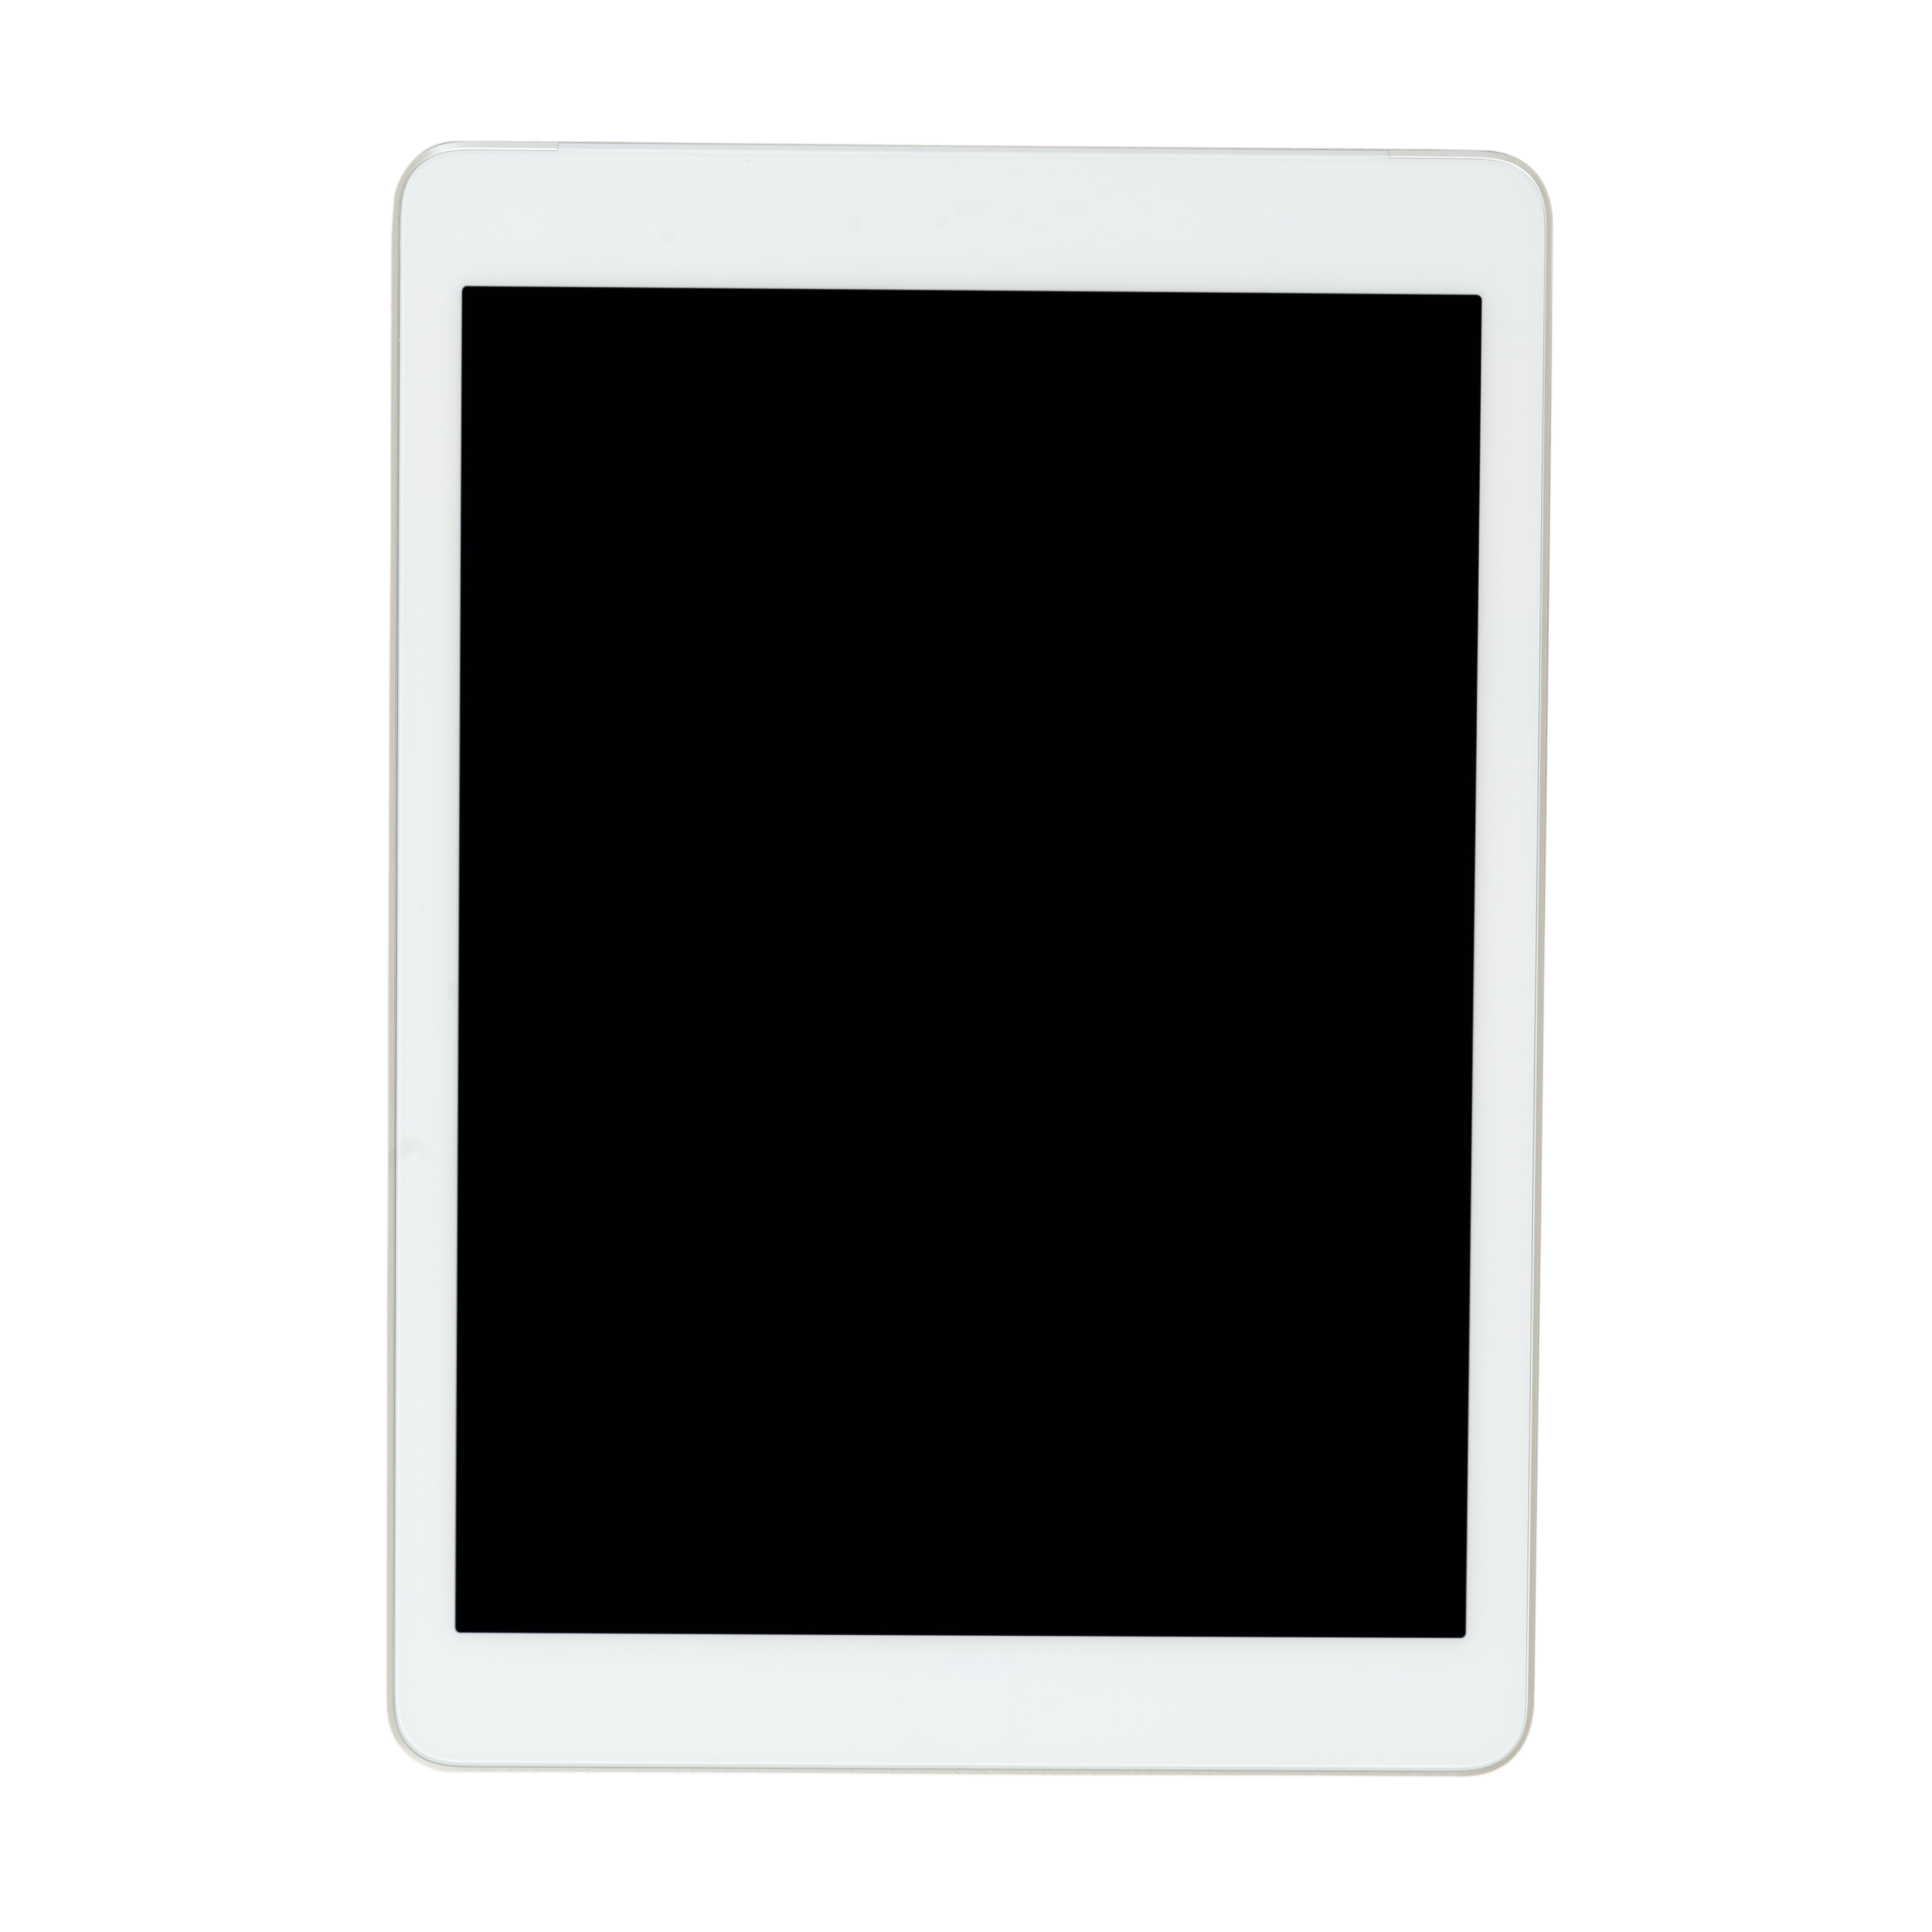 Tablet Hd Free Png Image - Tablet, Transparent background PNG HD thumbnail